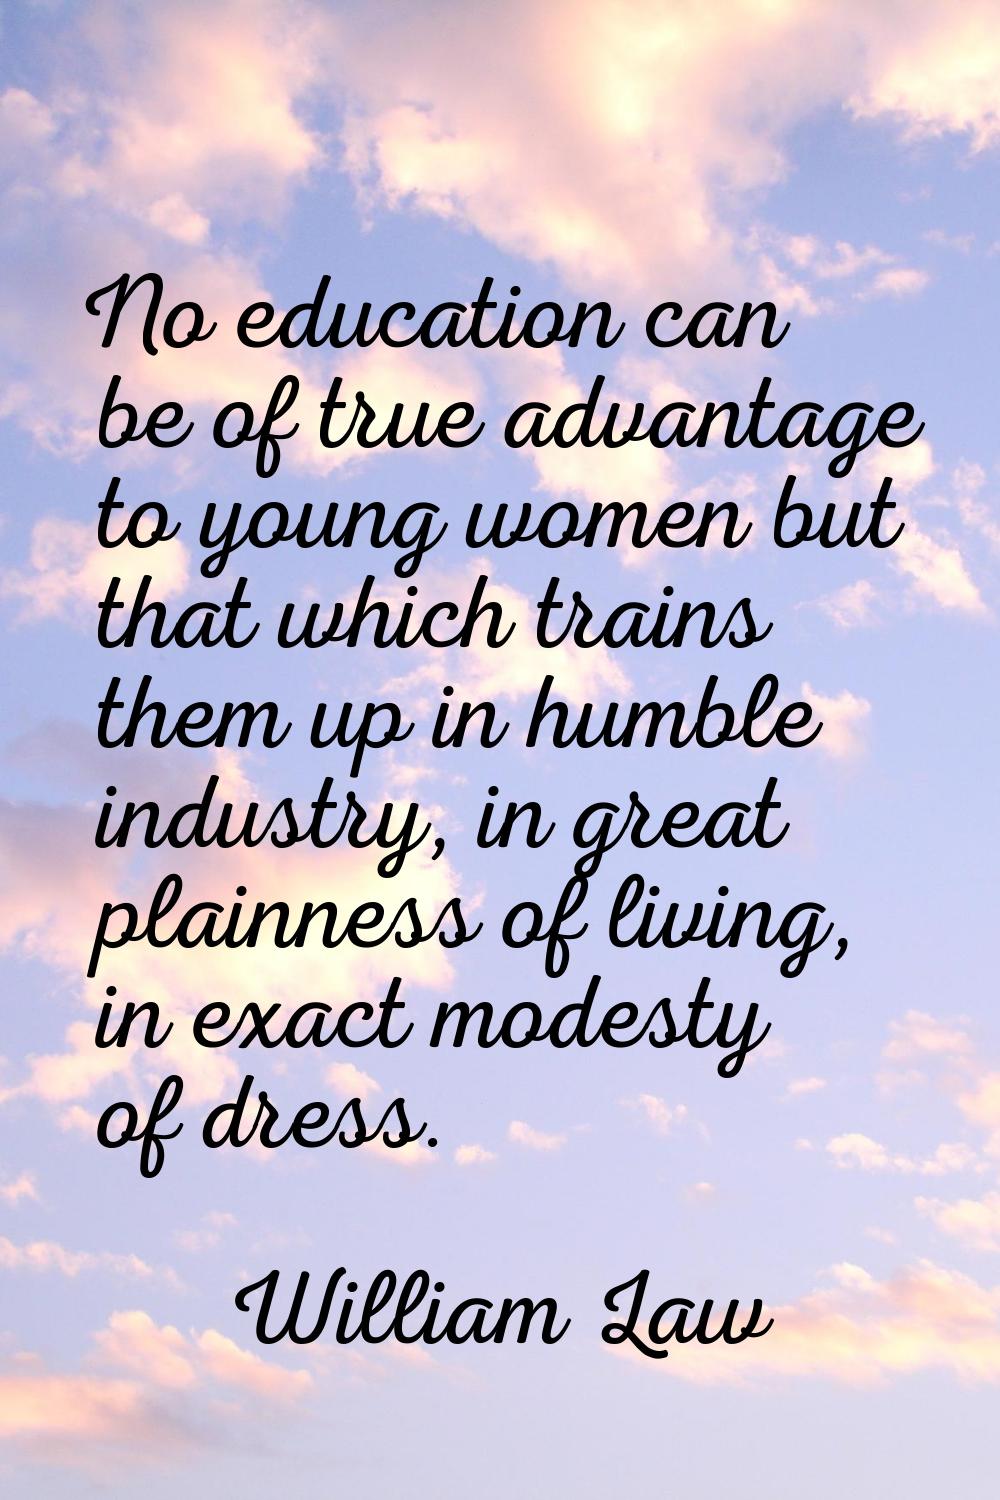 No education can be of true advantage to young women but that which trains them up in humble indust